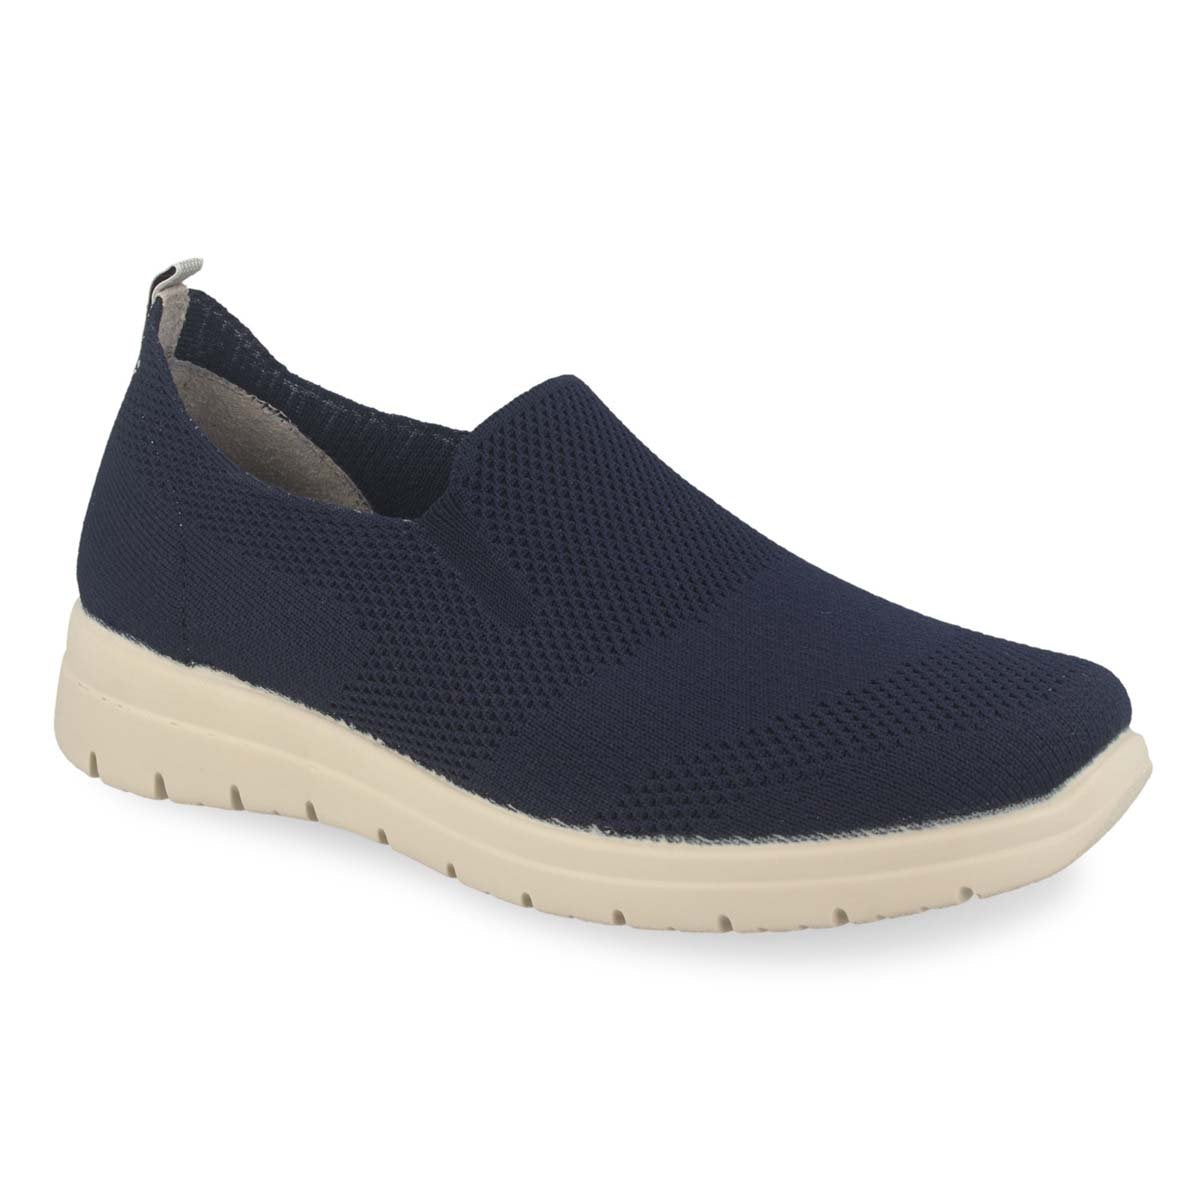 See the Stretch Mesh Cloth Sneakers Men Shoes in the colour DARK BLUE, available in various sizes